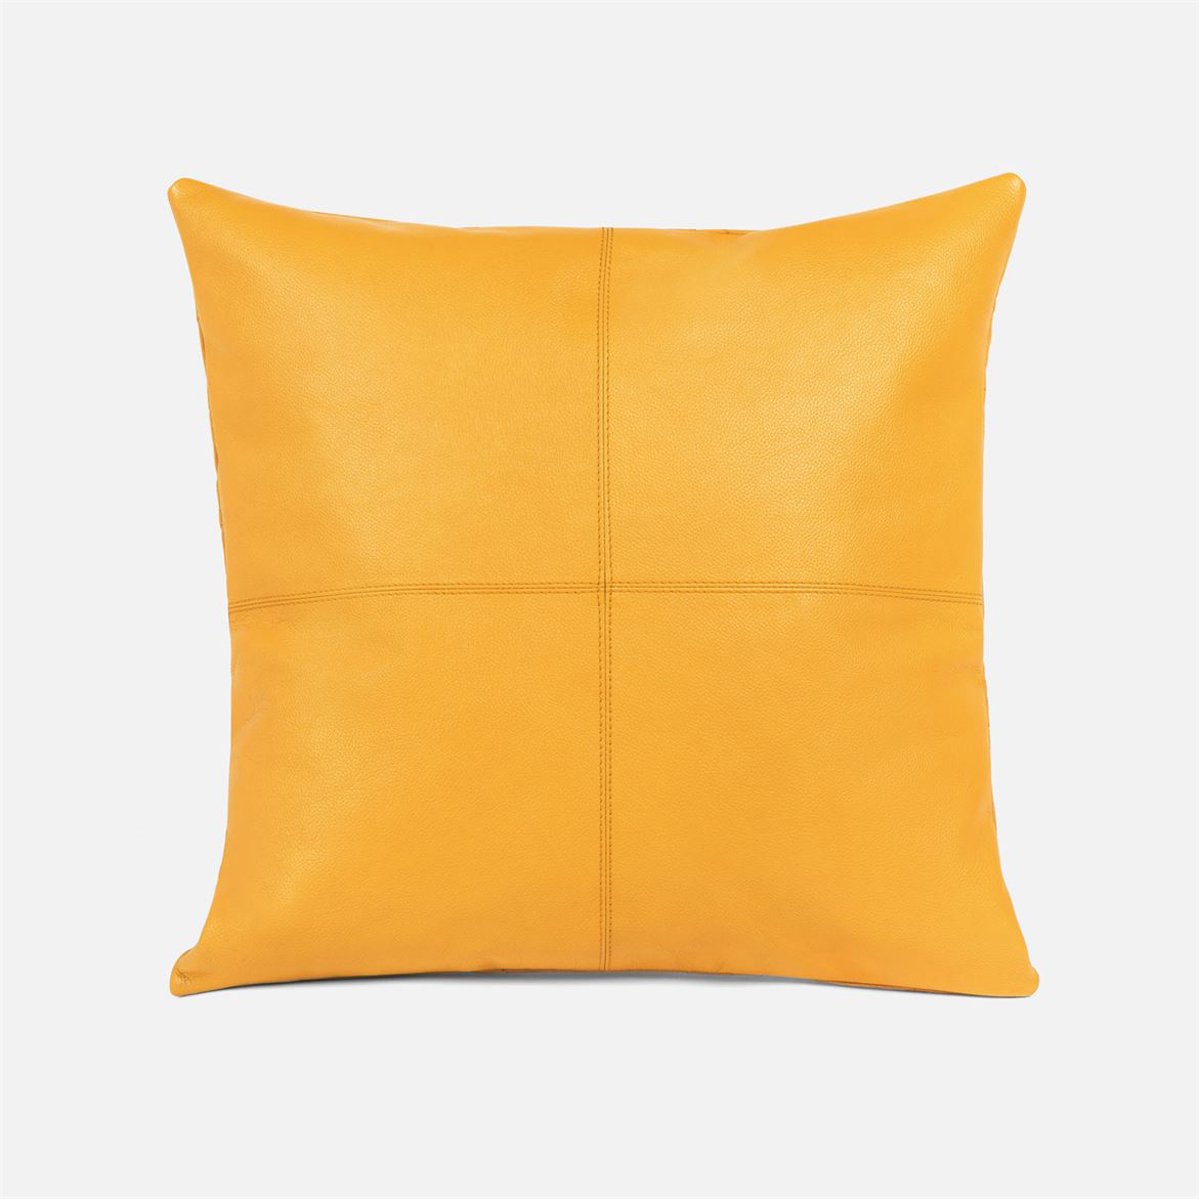 Made Goods Blakely Marigold Full-Grain Leather Pillows, Set of 2